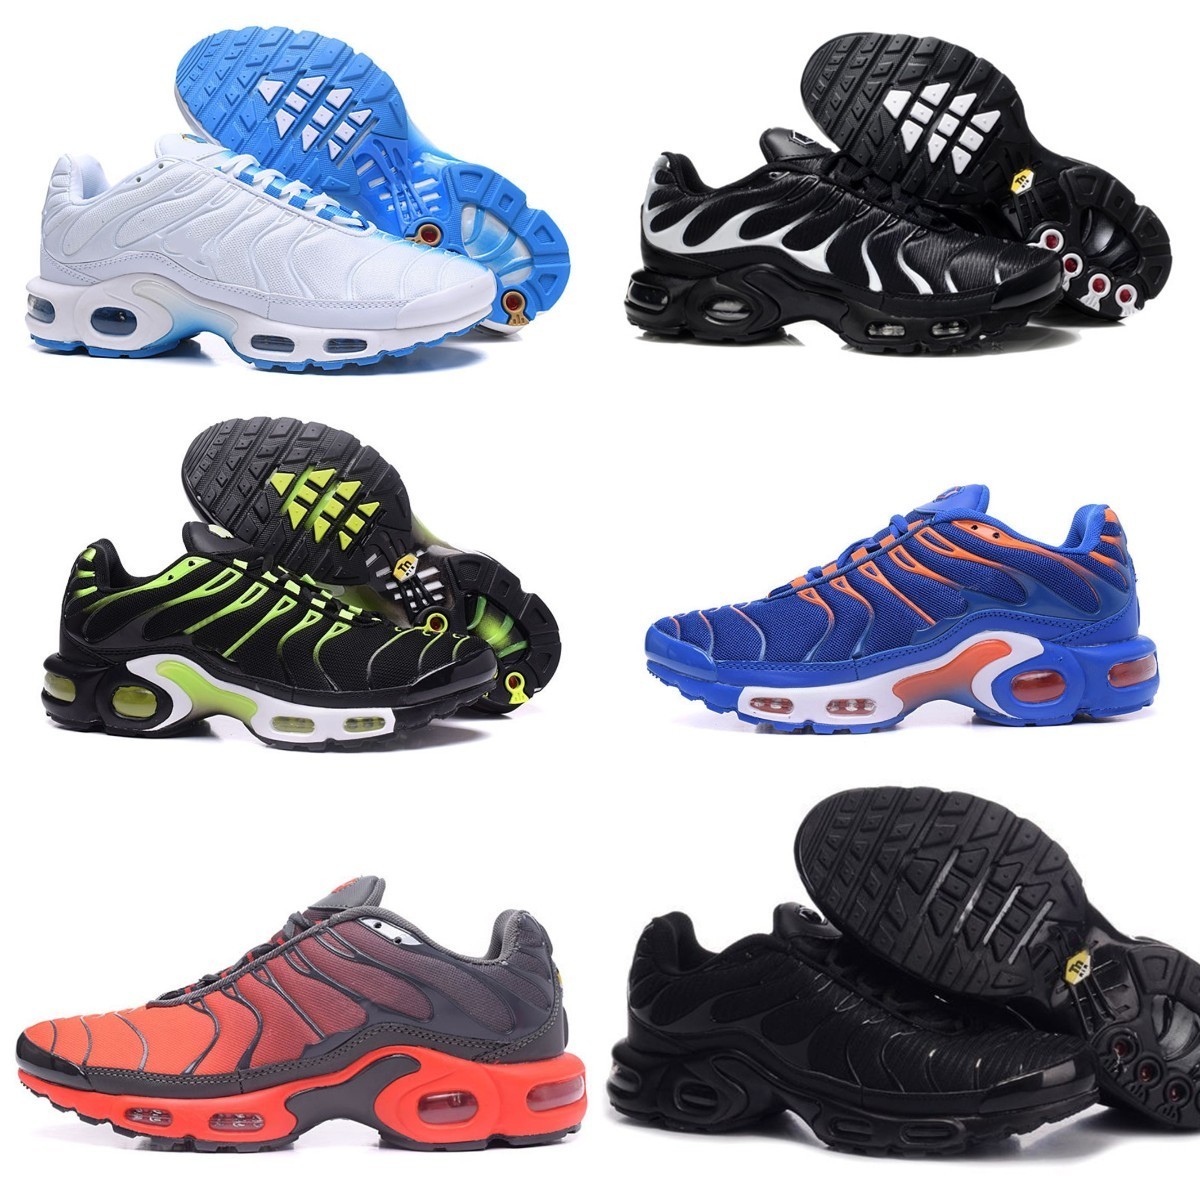 

2022 Mens Tn Running Shoes Tns OG Triple Black White Be True Max Plus Ultra Seafoam Grey Frost Pink Teal Volt Blue Crinkled Metal Chaussures Requin Designer Sneakers S8, Please contact us